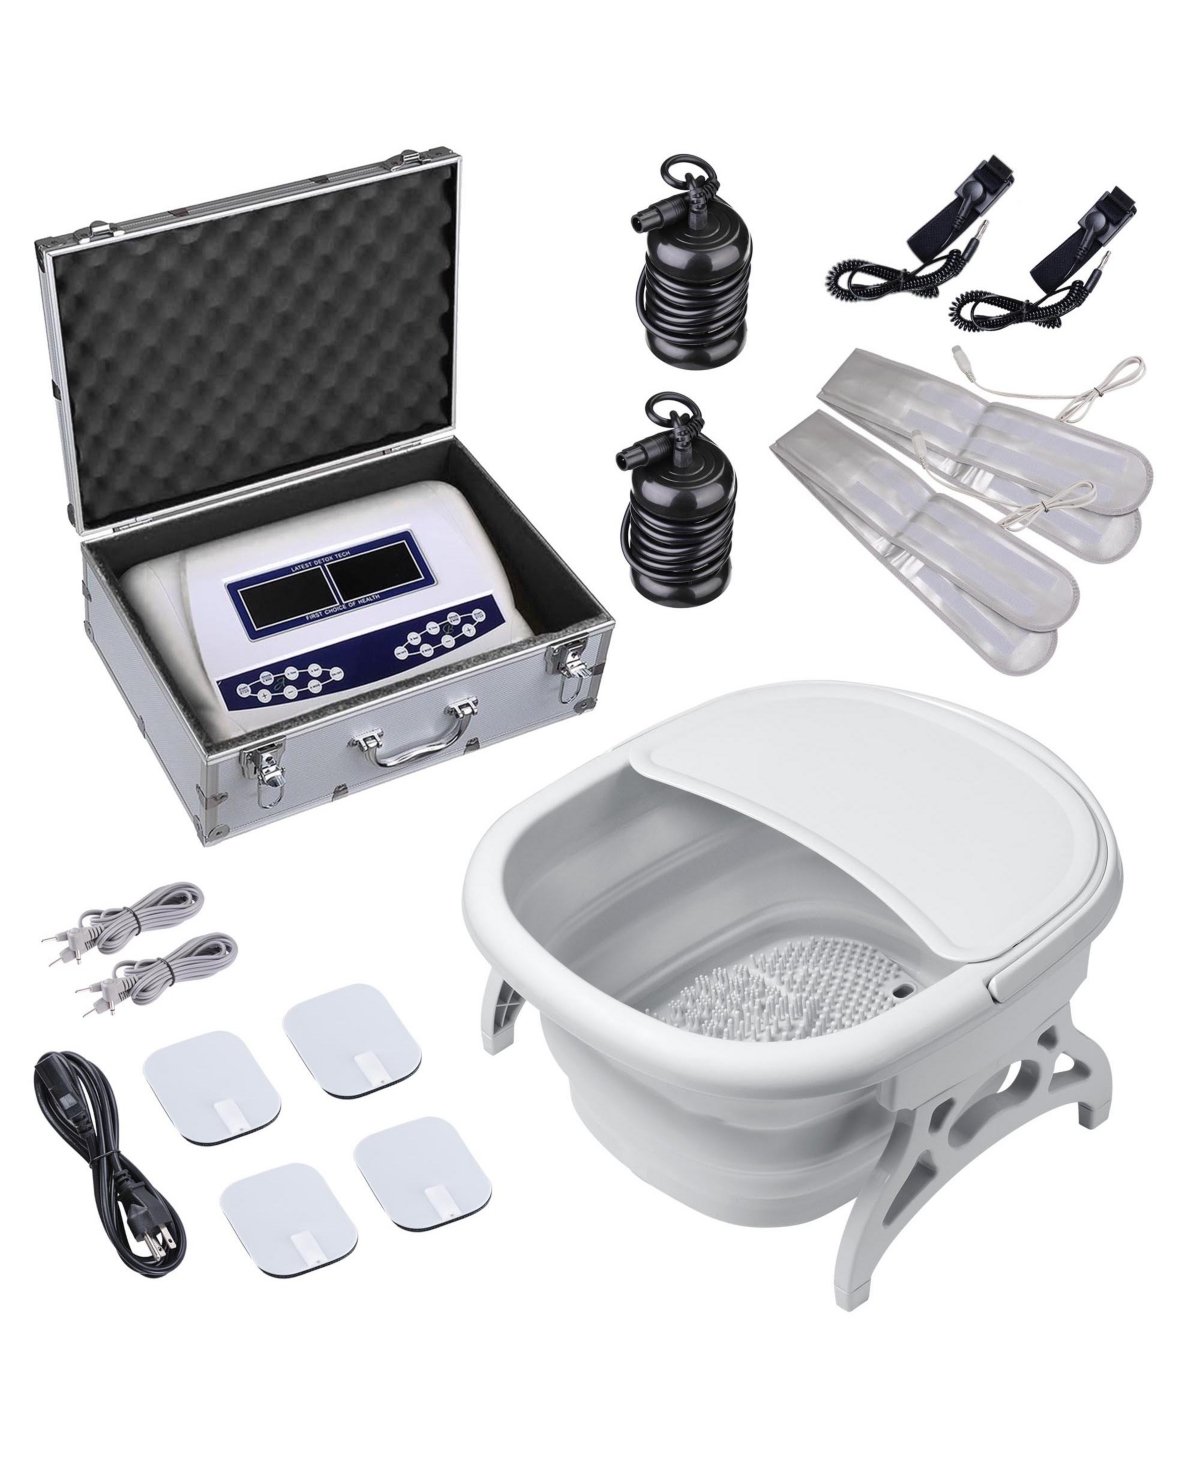 Dual User Ionic Detox Foot Spa Machine Tub Kit with Arrays Infrared Belts Home - Open Miscellaneous